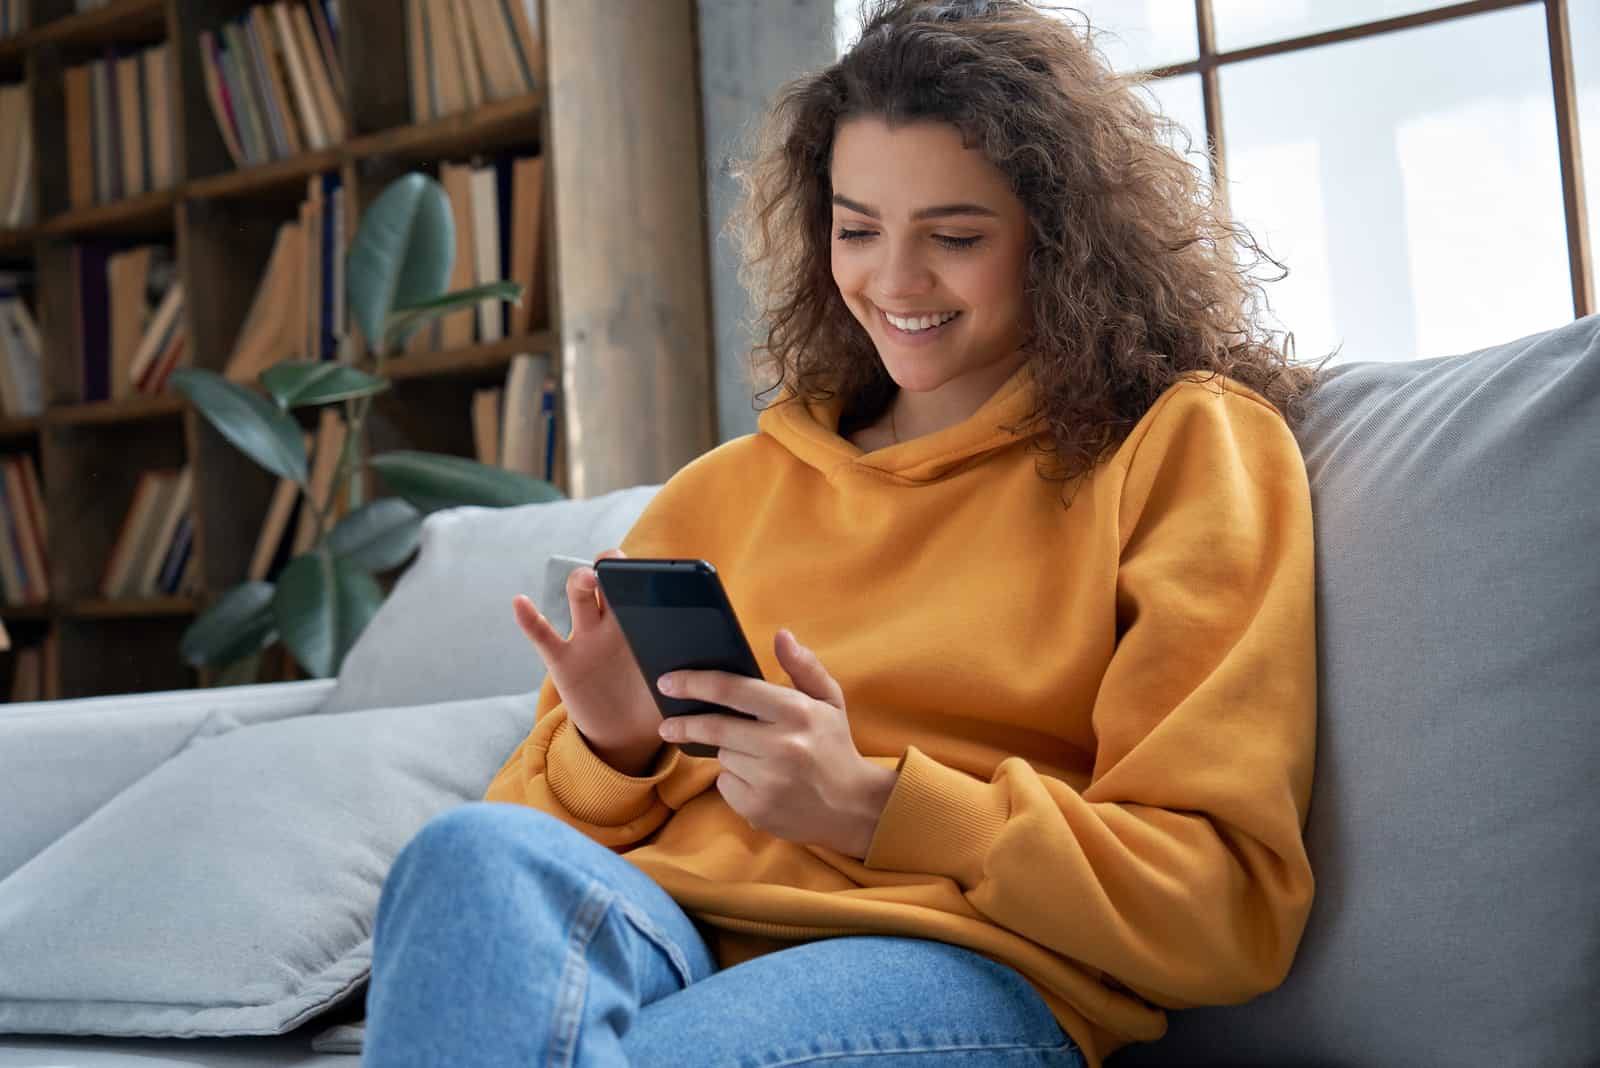 a smiling woman with frizzy hair sits on the couch and buttons on the phone